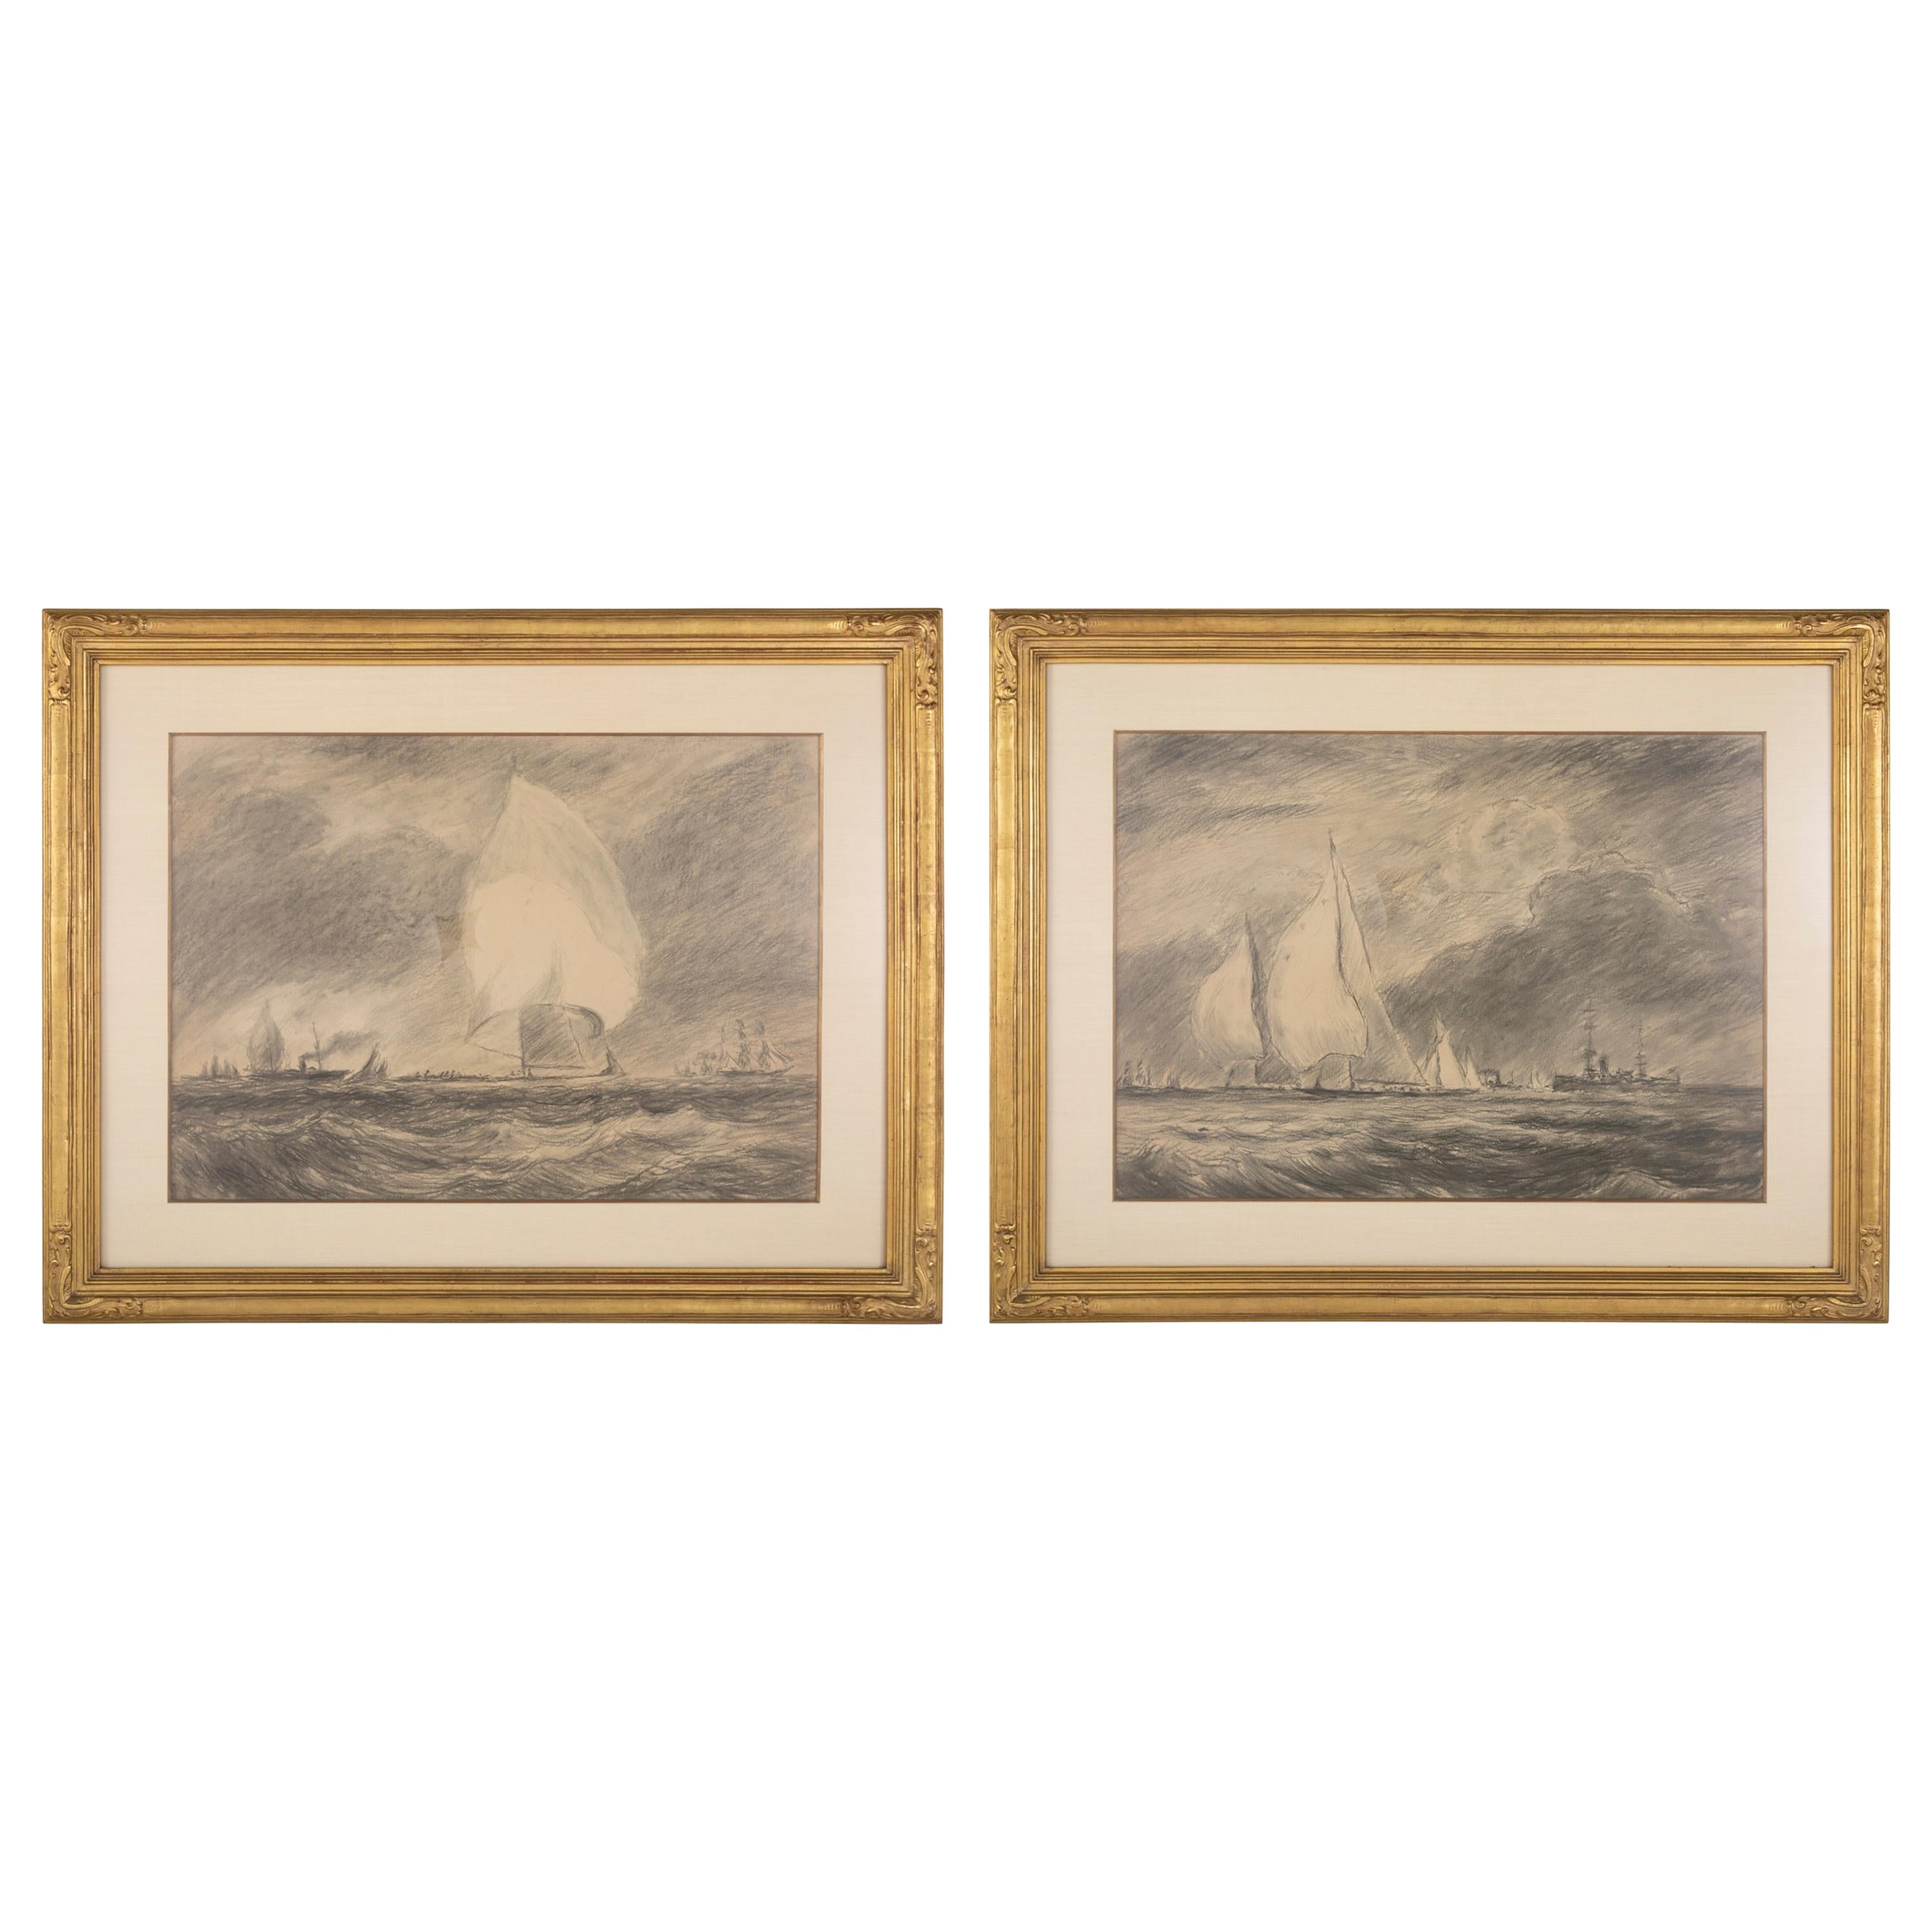 Pair of Charcoal and Crayon Sketches by Reynolds Beal